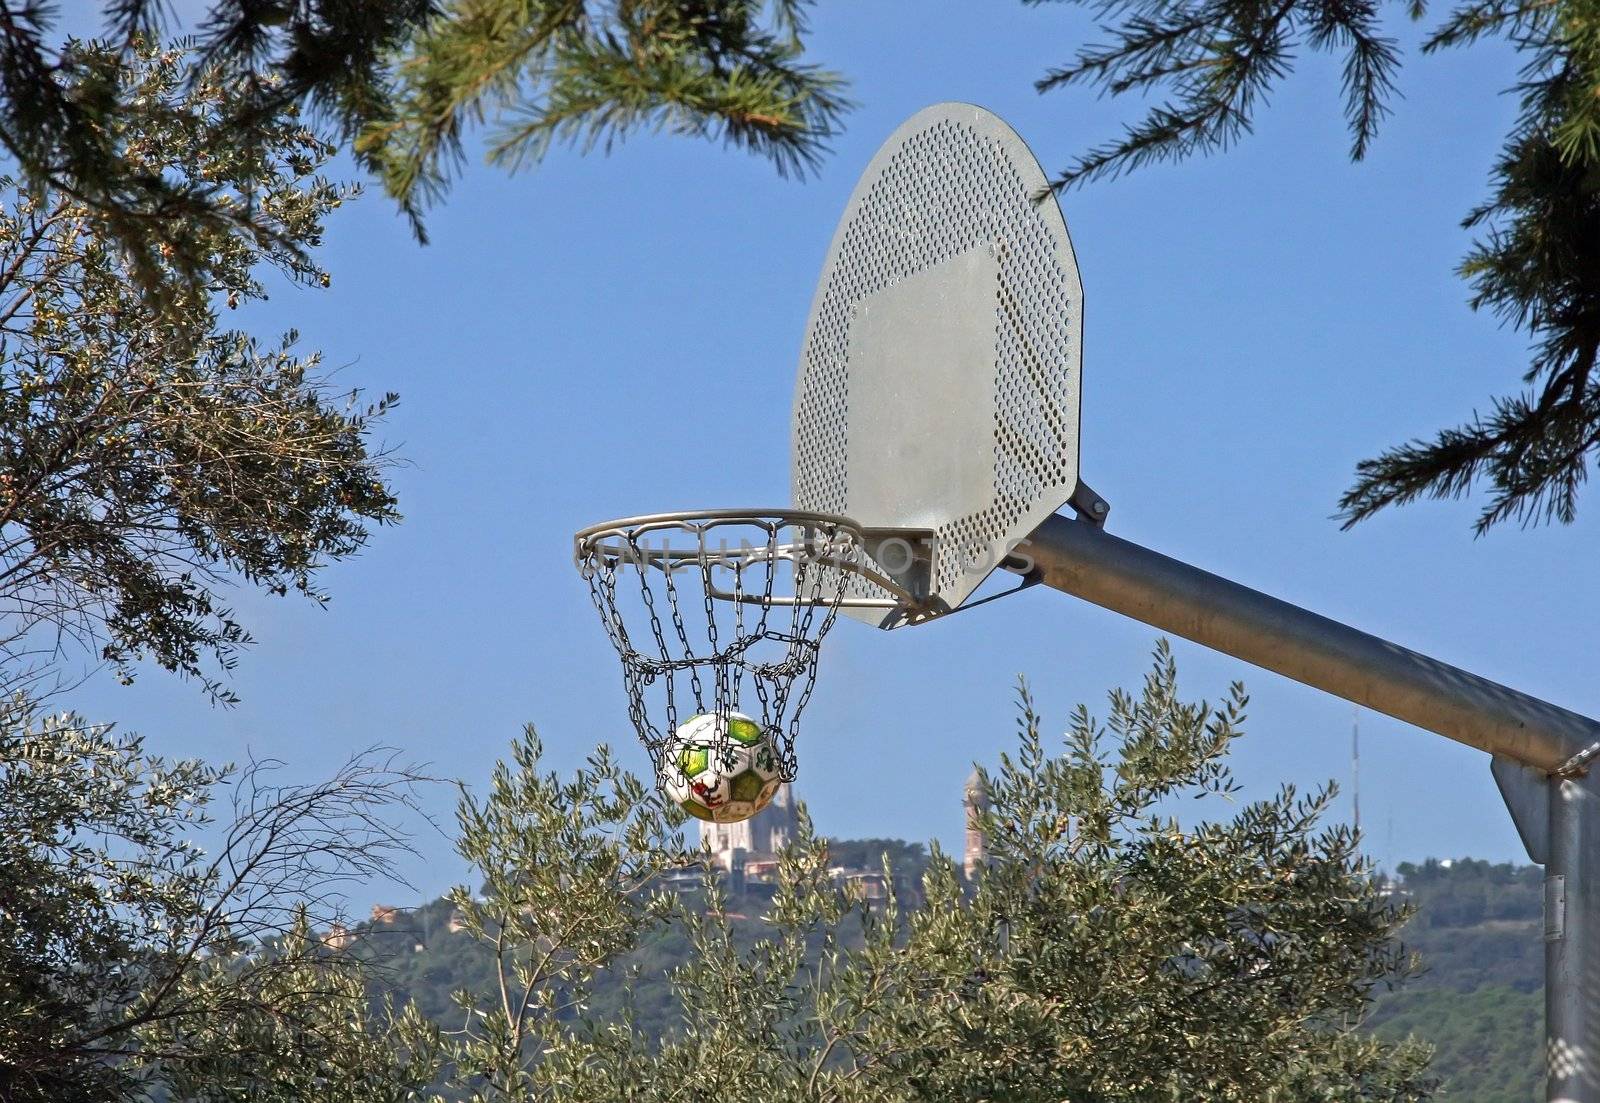 basketball surrounded with vegetation, in a outdoor park